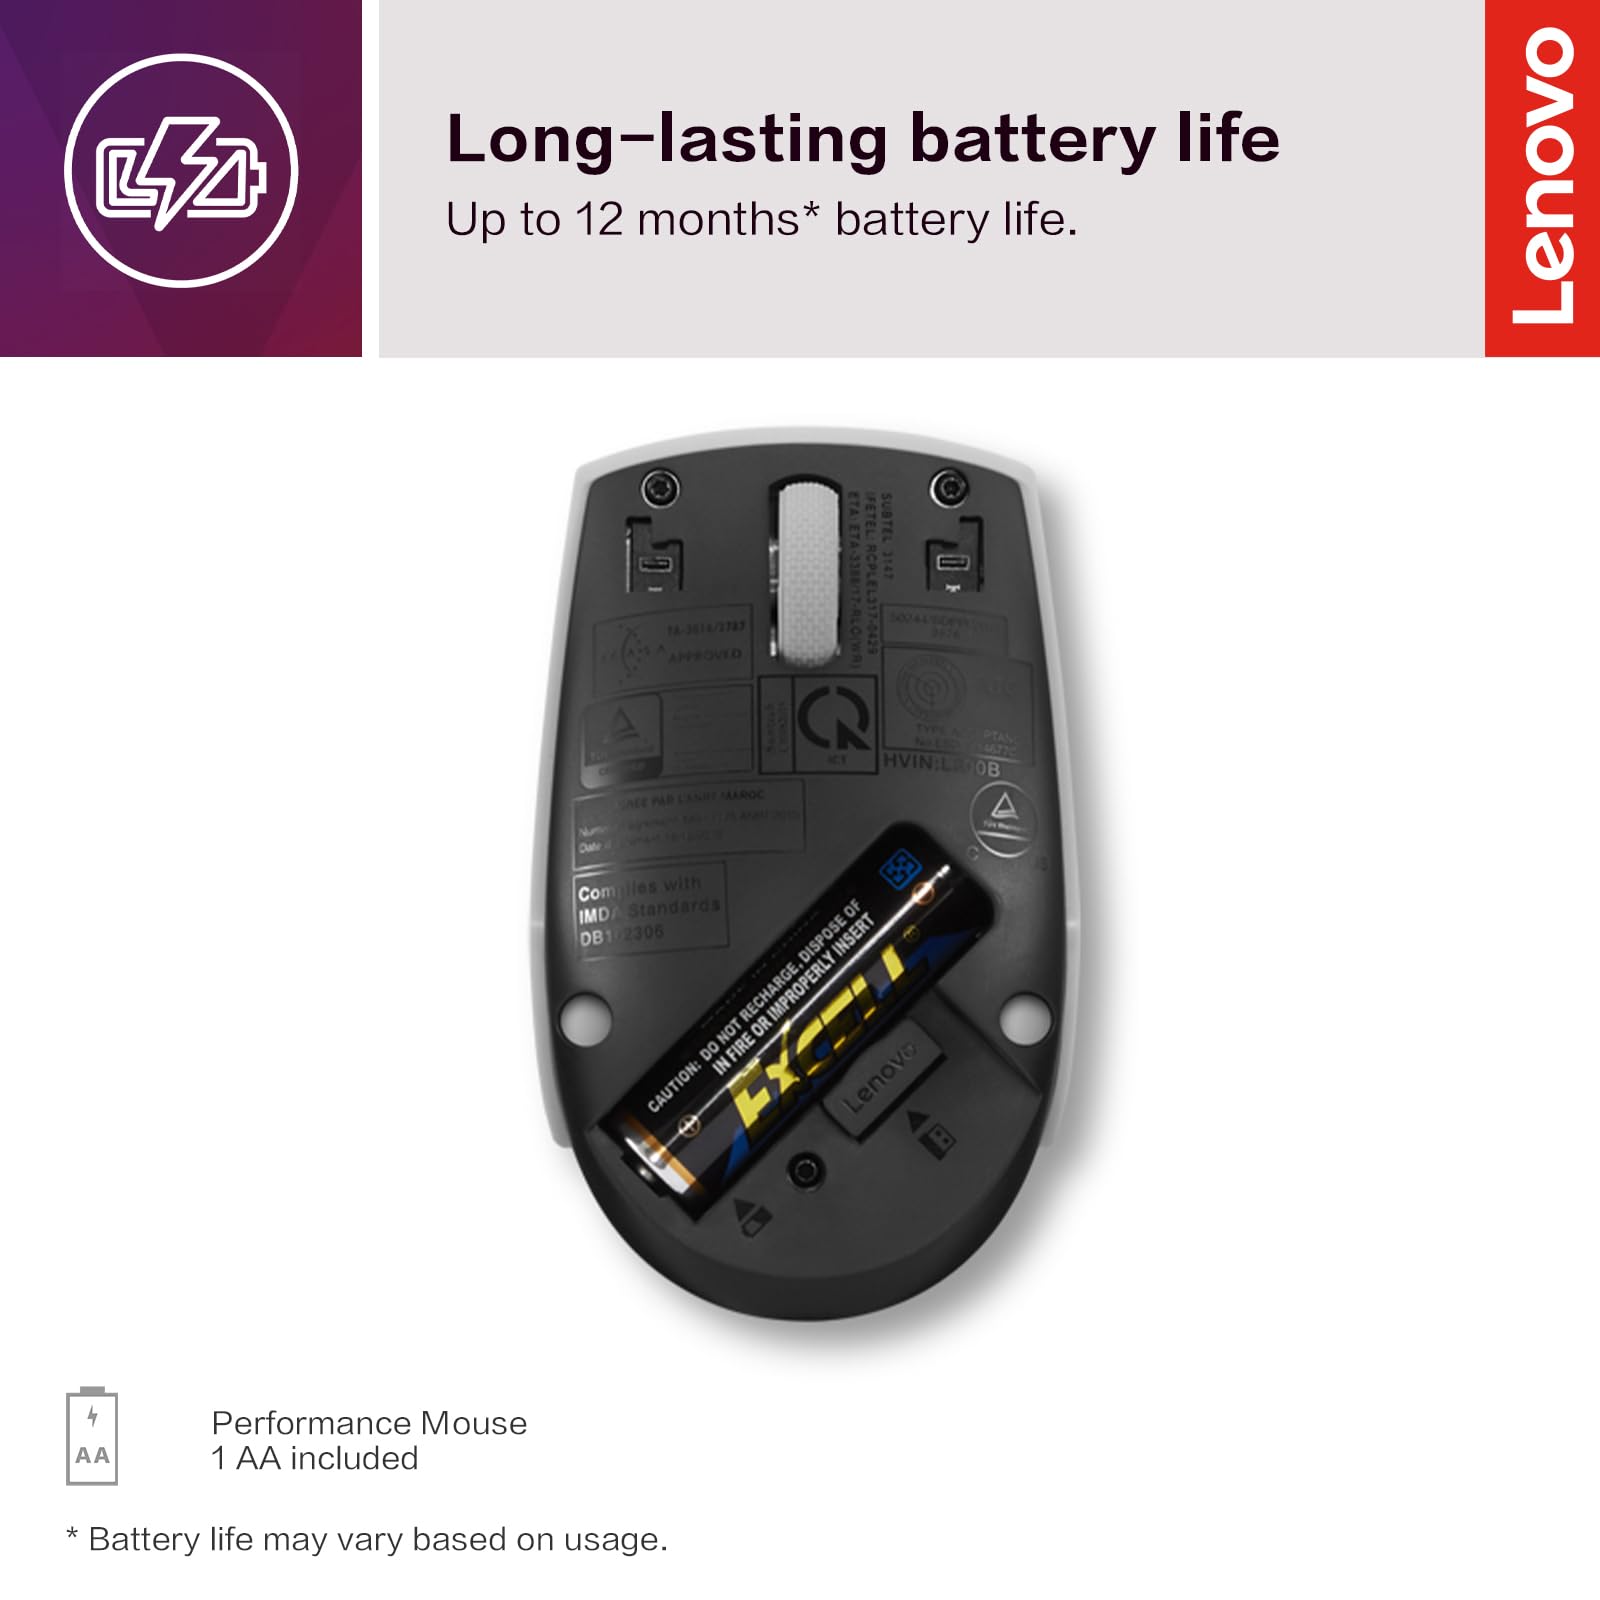 Lenovo 300 Wireless Mouse – Computer Mouse for PC, Laptop with Windows – Ambidextrous Design – 2.4 GHz Nano USB Receiver – 12 Month Battery Life